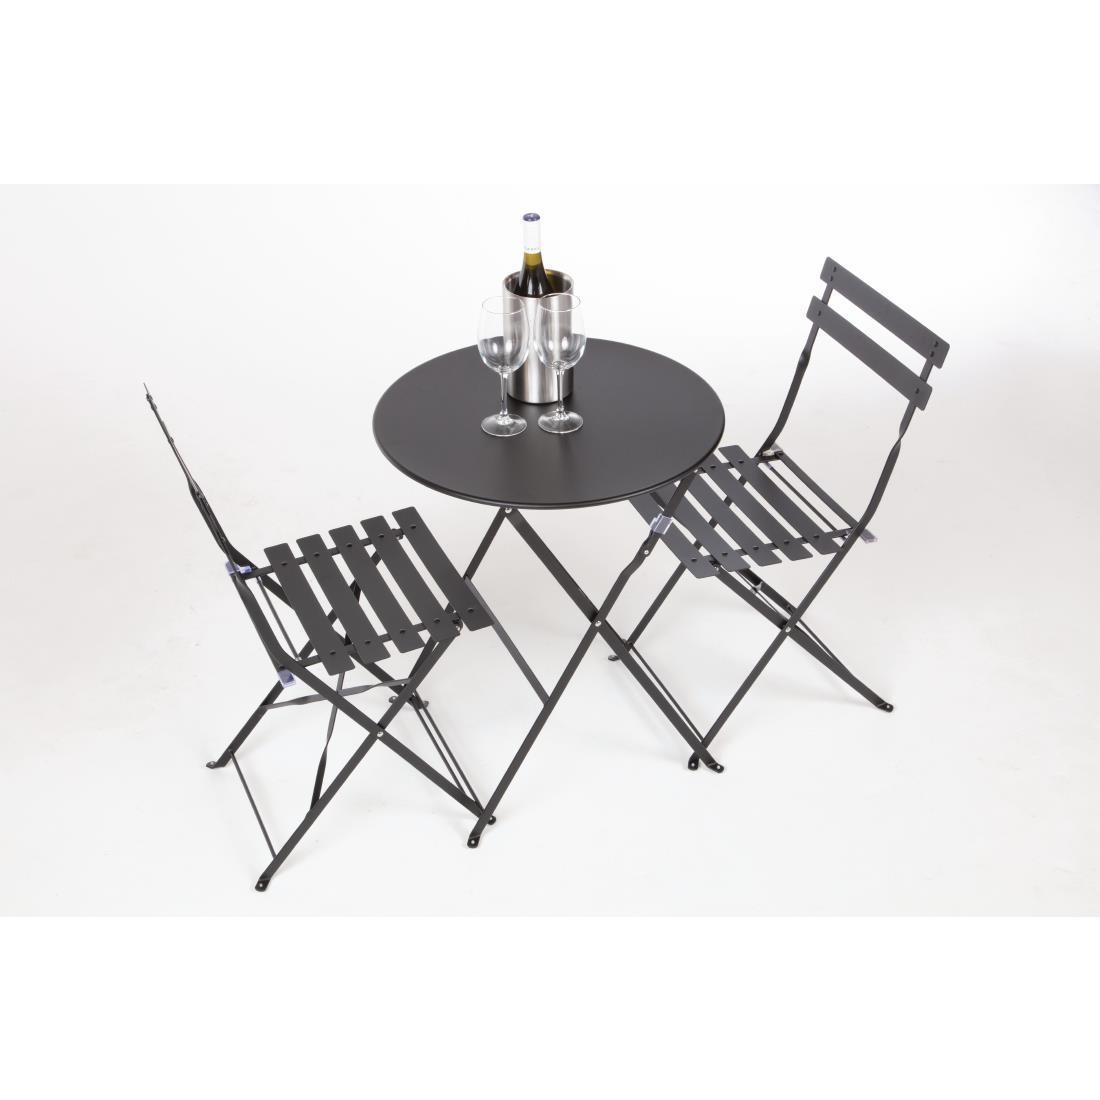 Bolero Black Pavement Style Steel Chairs (Pack of 2) - GH553  - 10